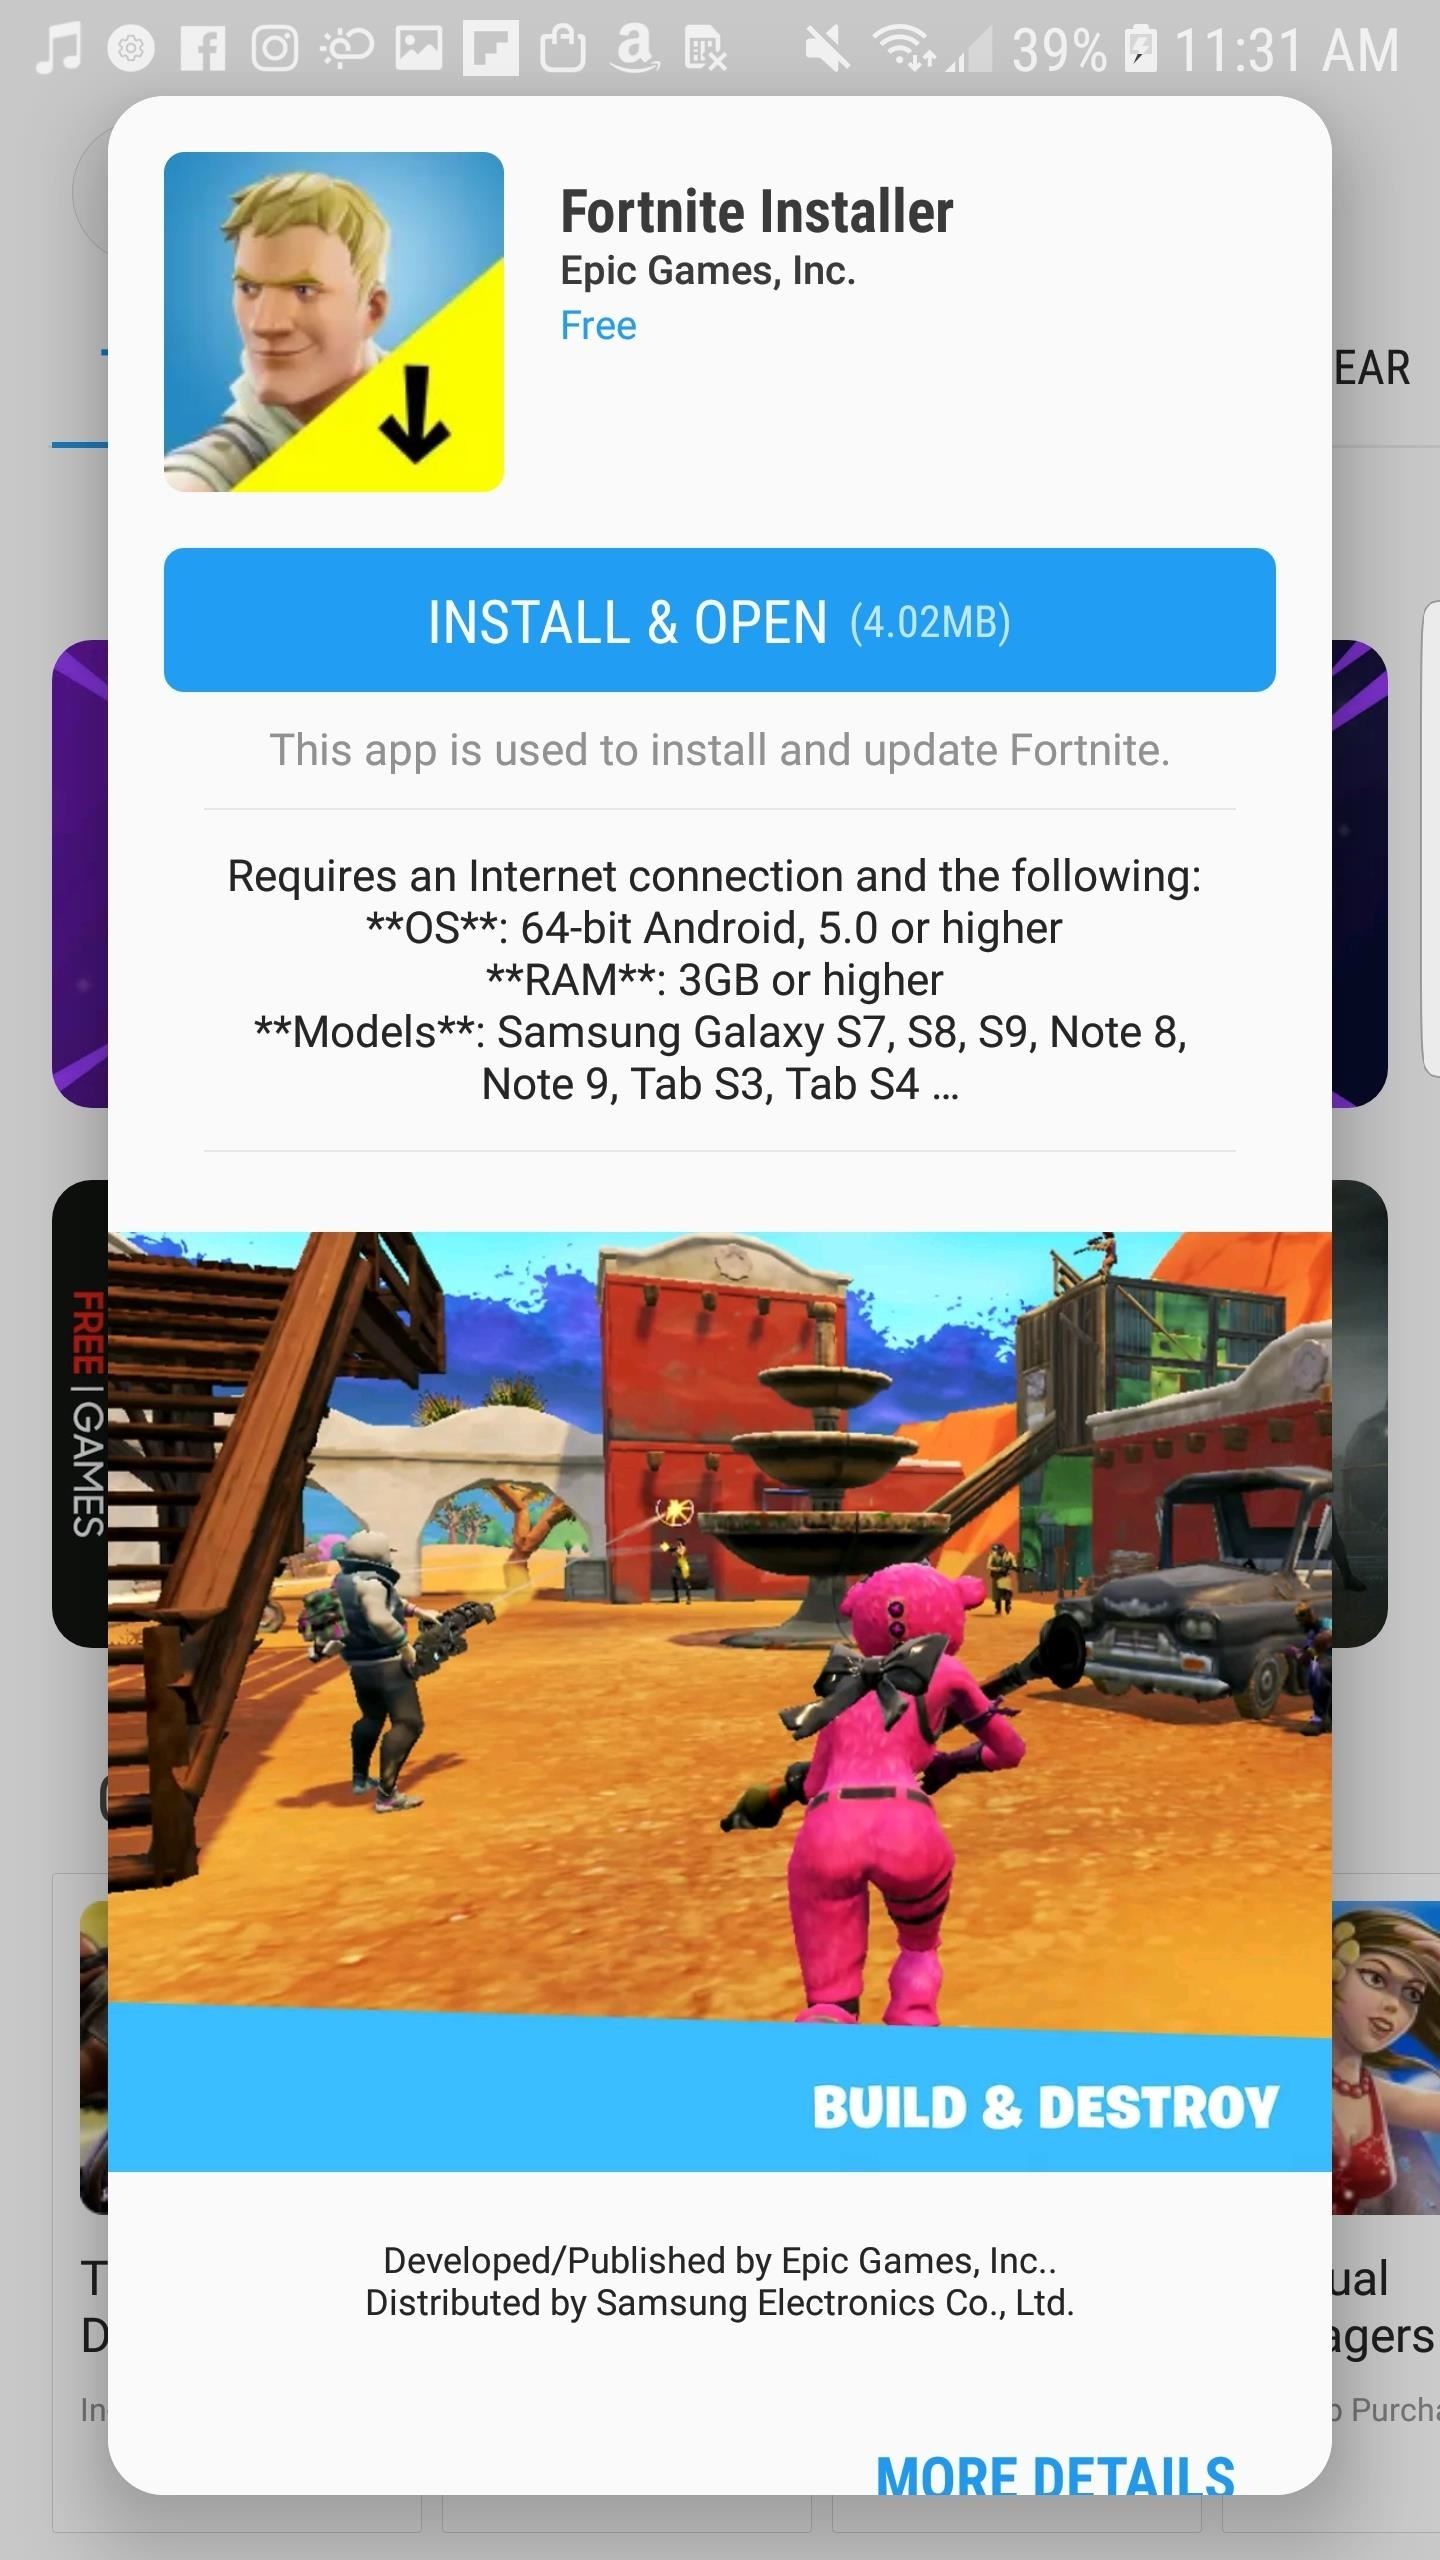 How to Get Fortnite for Android on Your Galaxy S7, S8, S9, or Note 8 Right Now